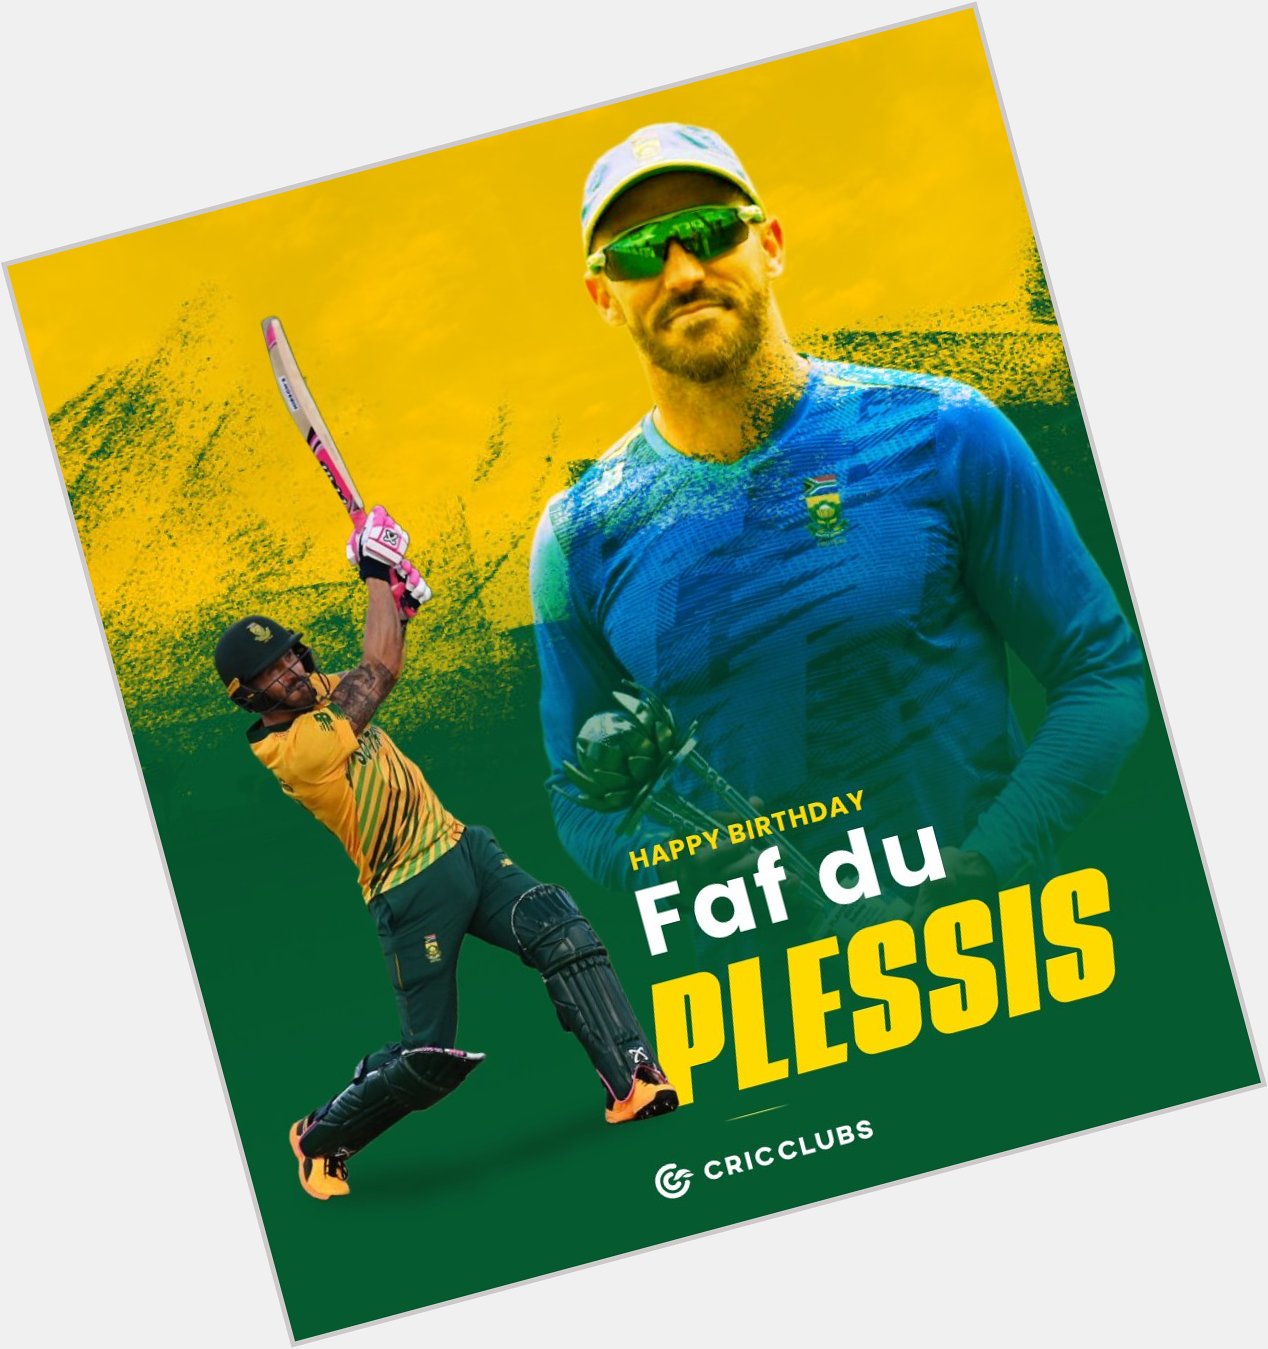 Join us wishing the Protea fire Faf du Plessis, A very happy birthday!   